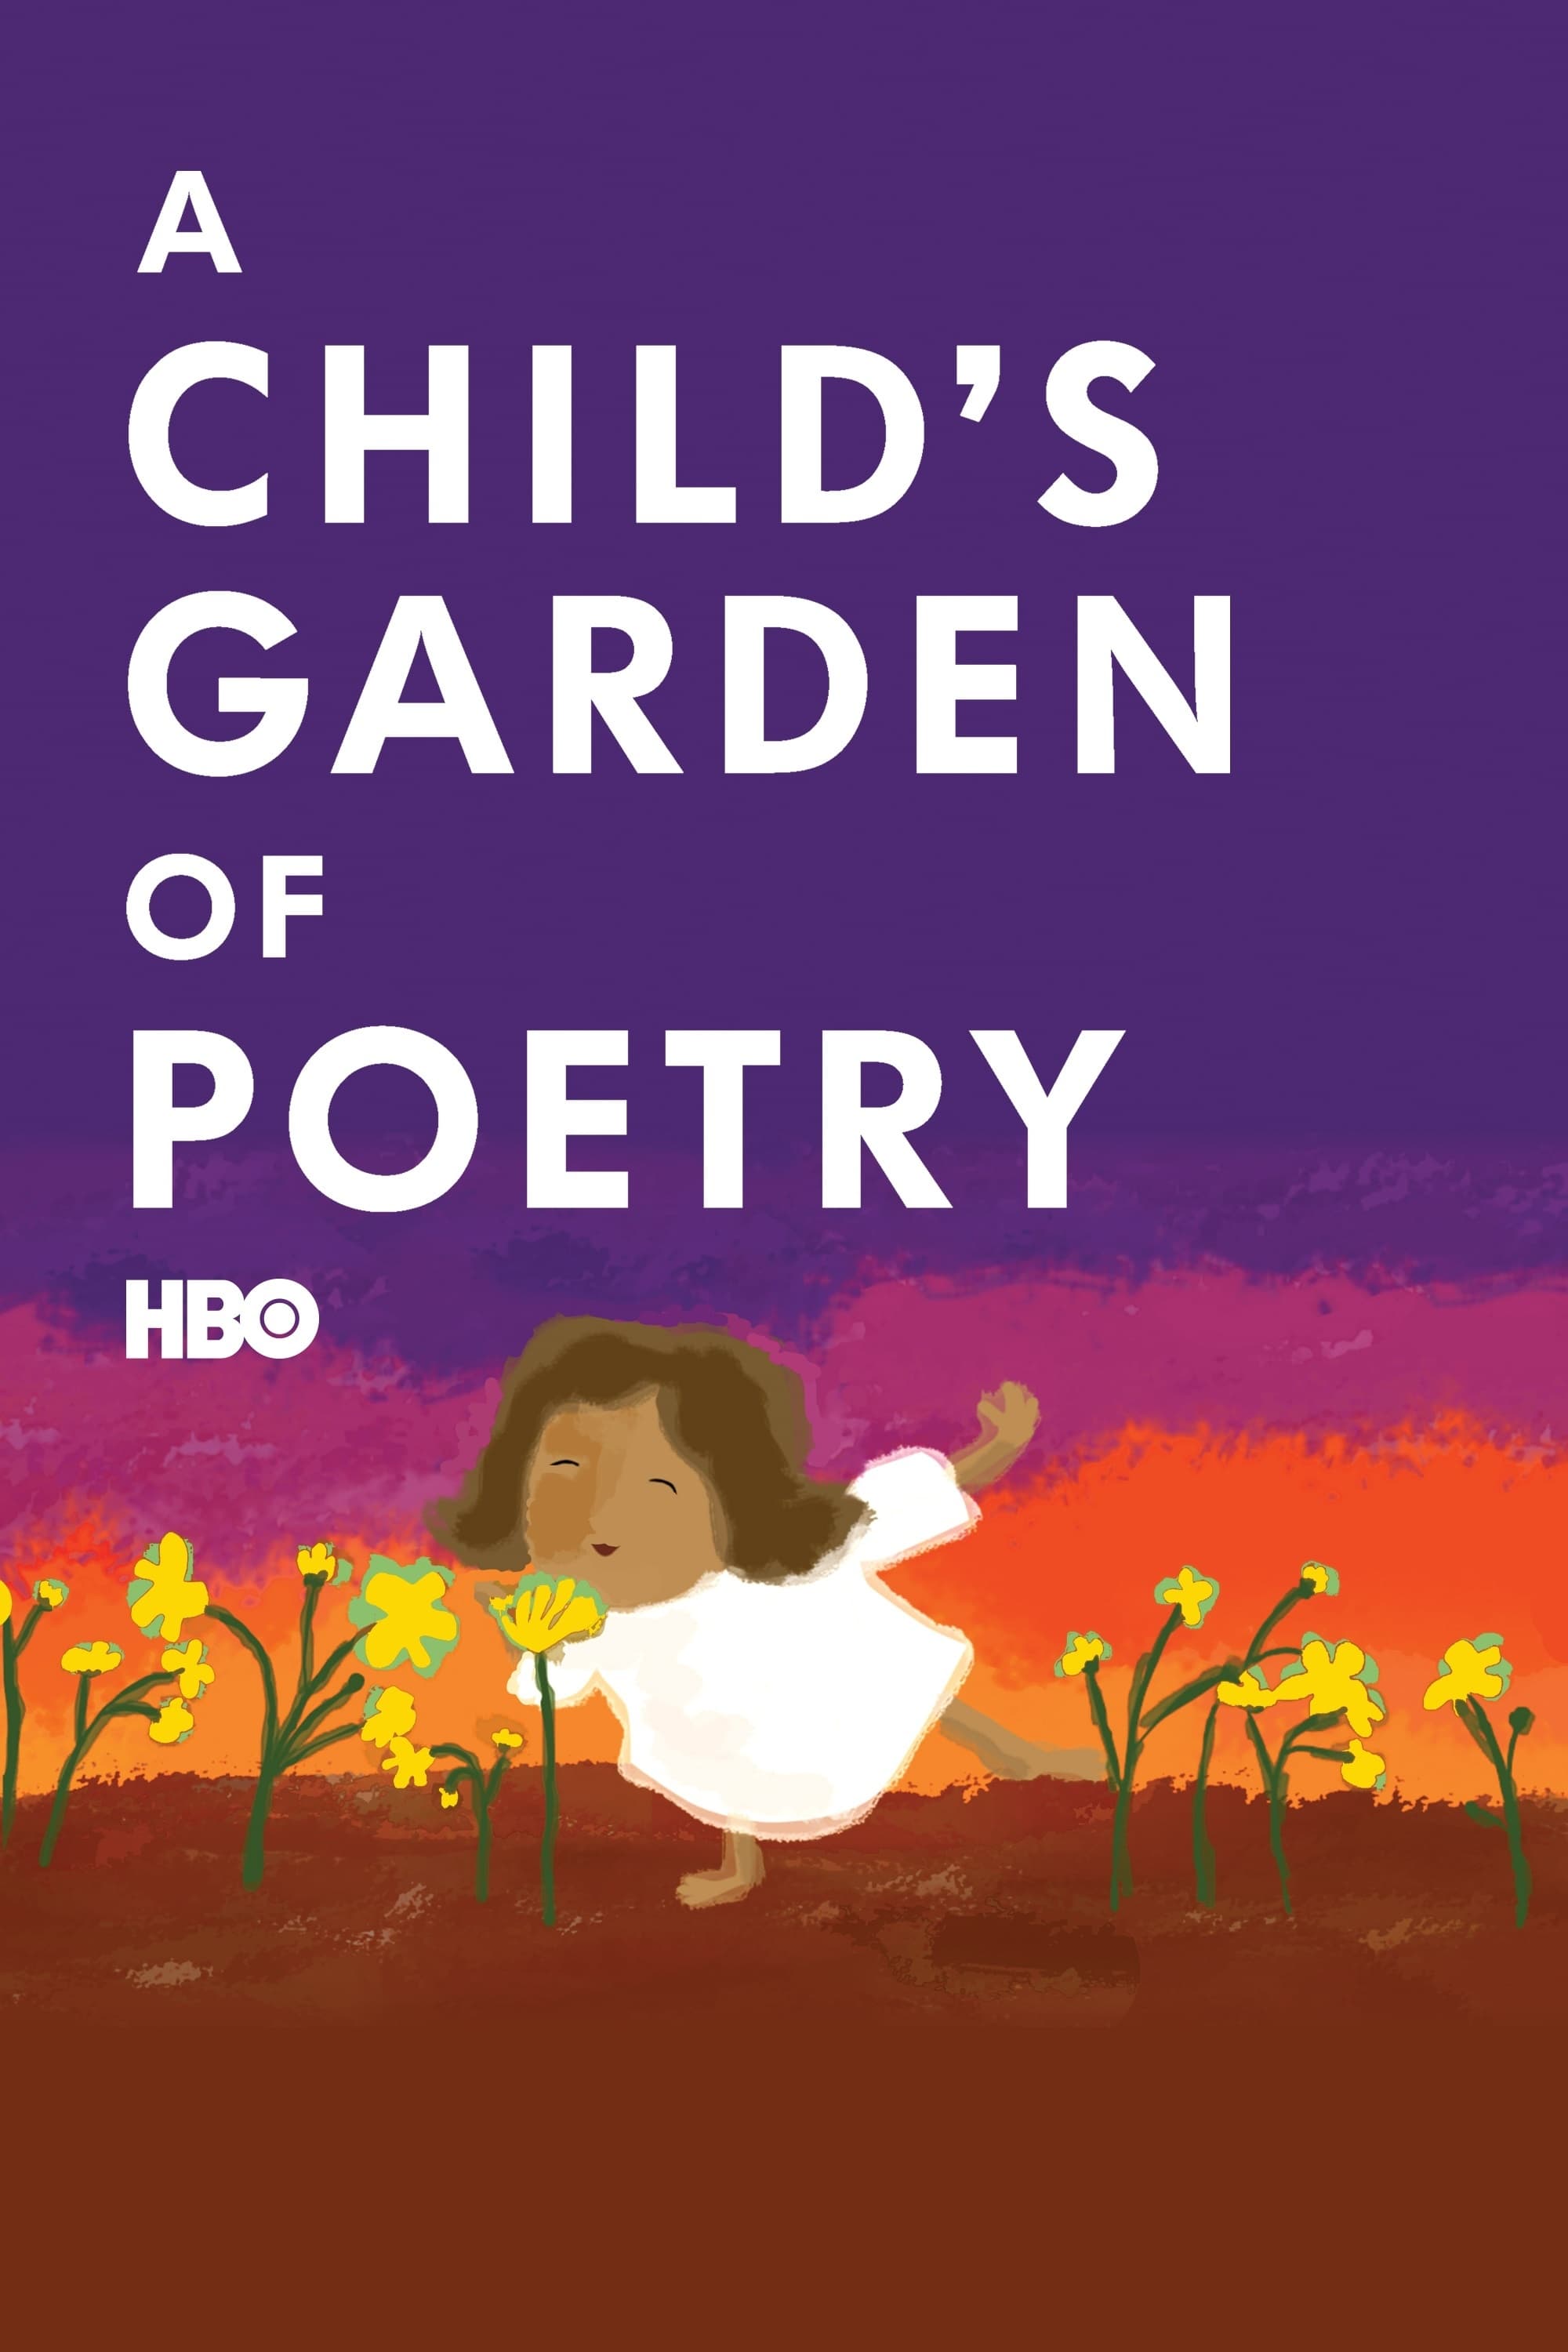 A Childs Garden of Poetry